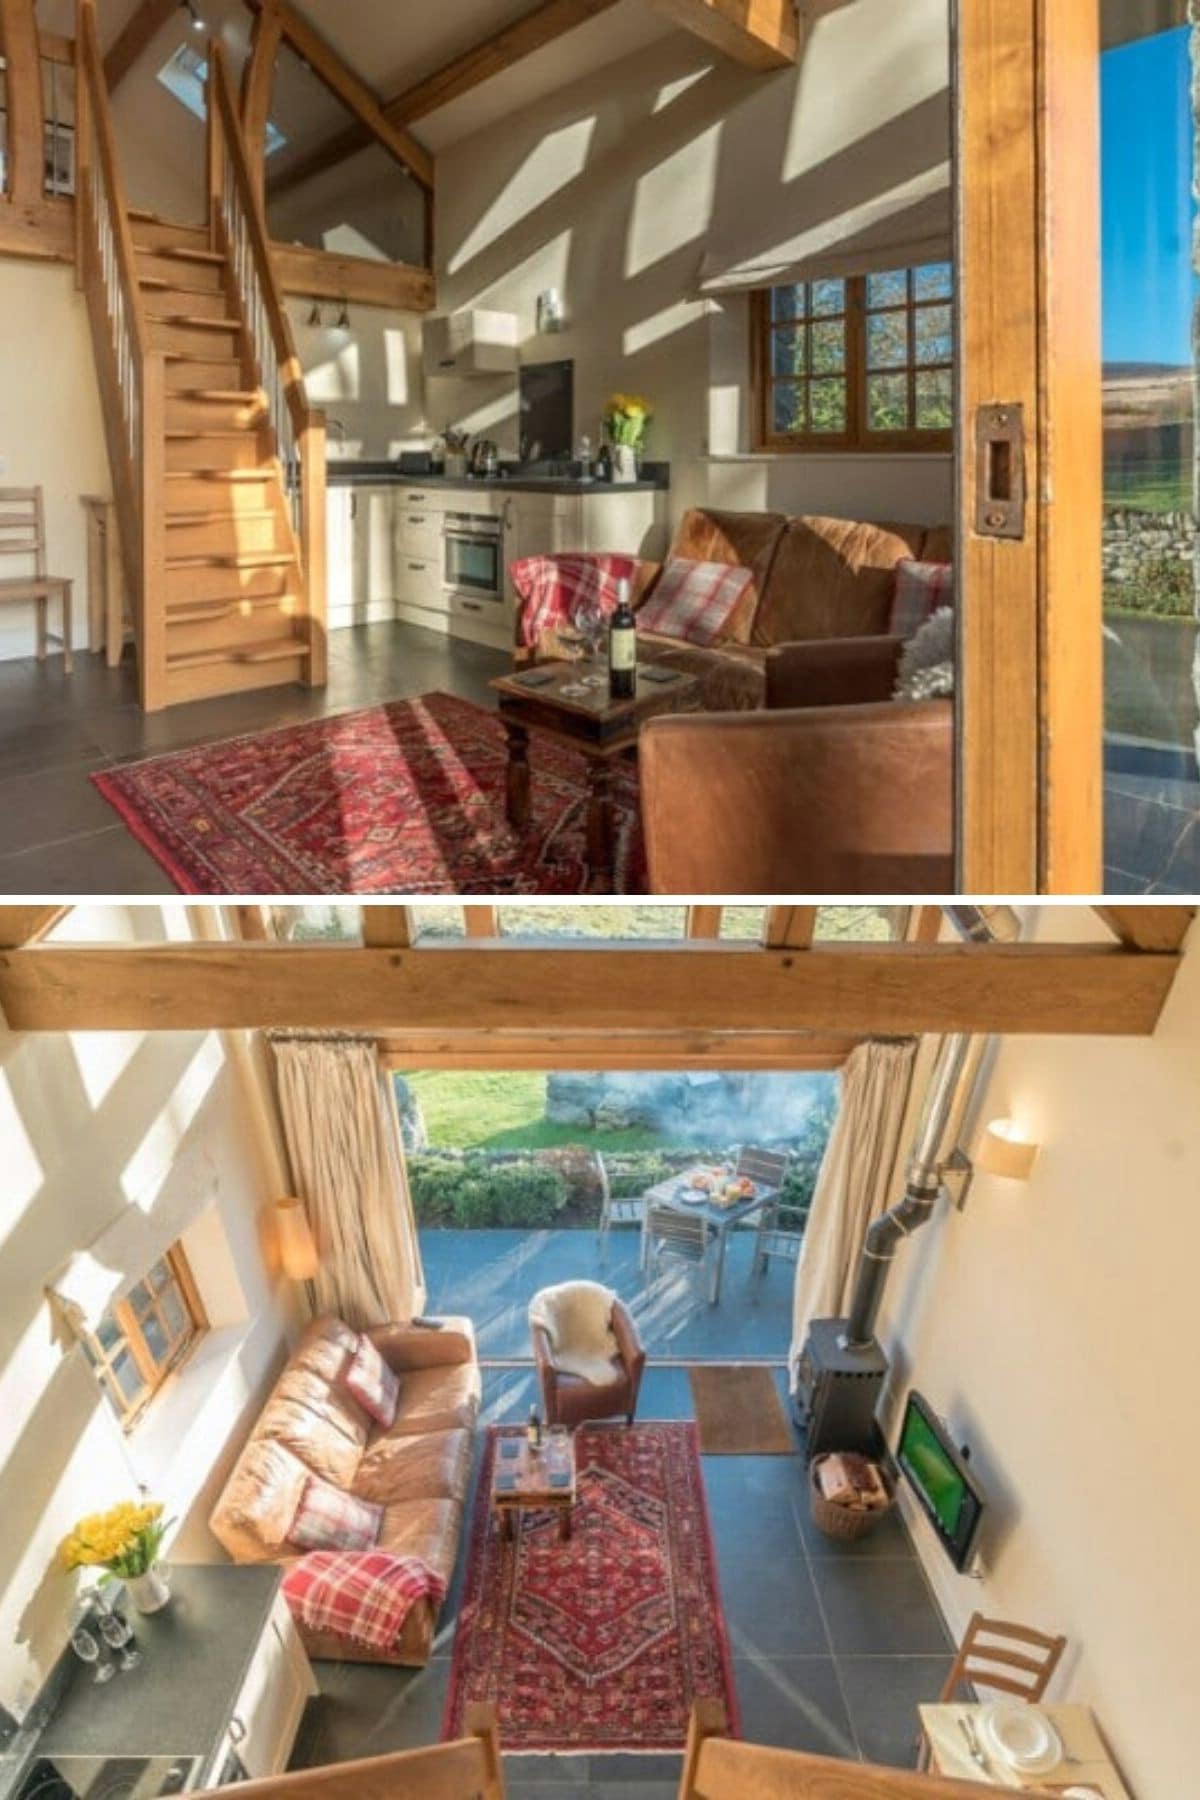 Welsh Self-Catering Barn Conversion Tiny Accommodation With Incredible Views